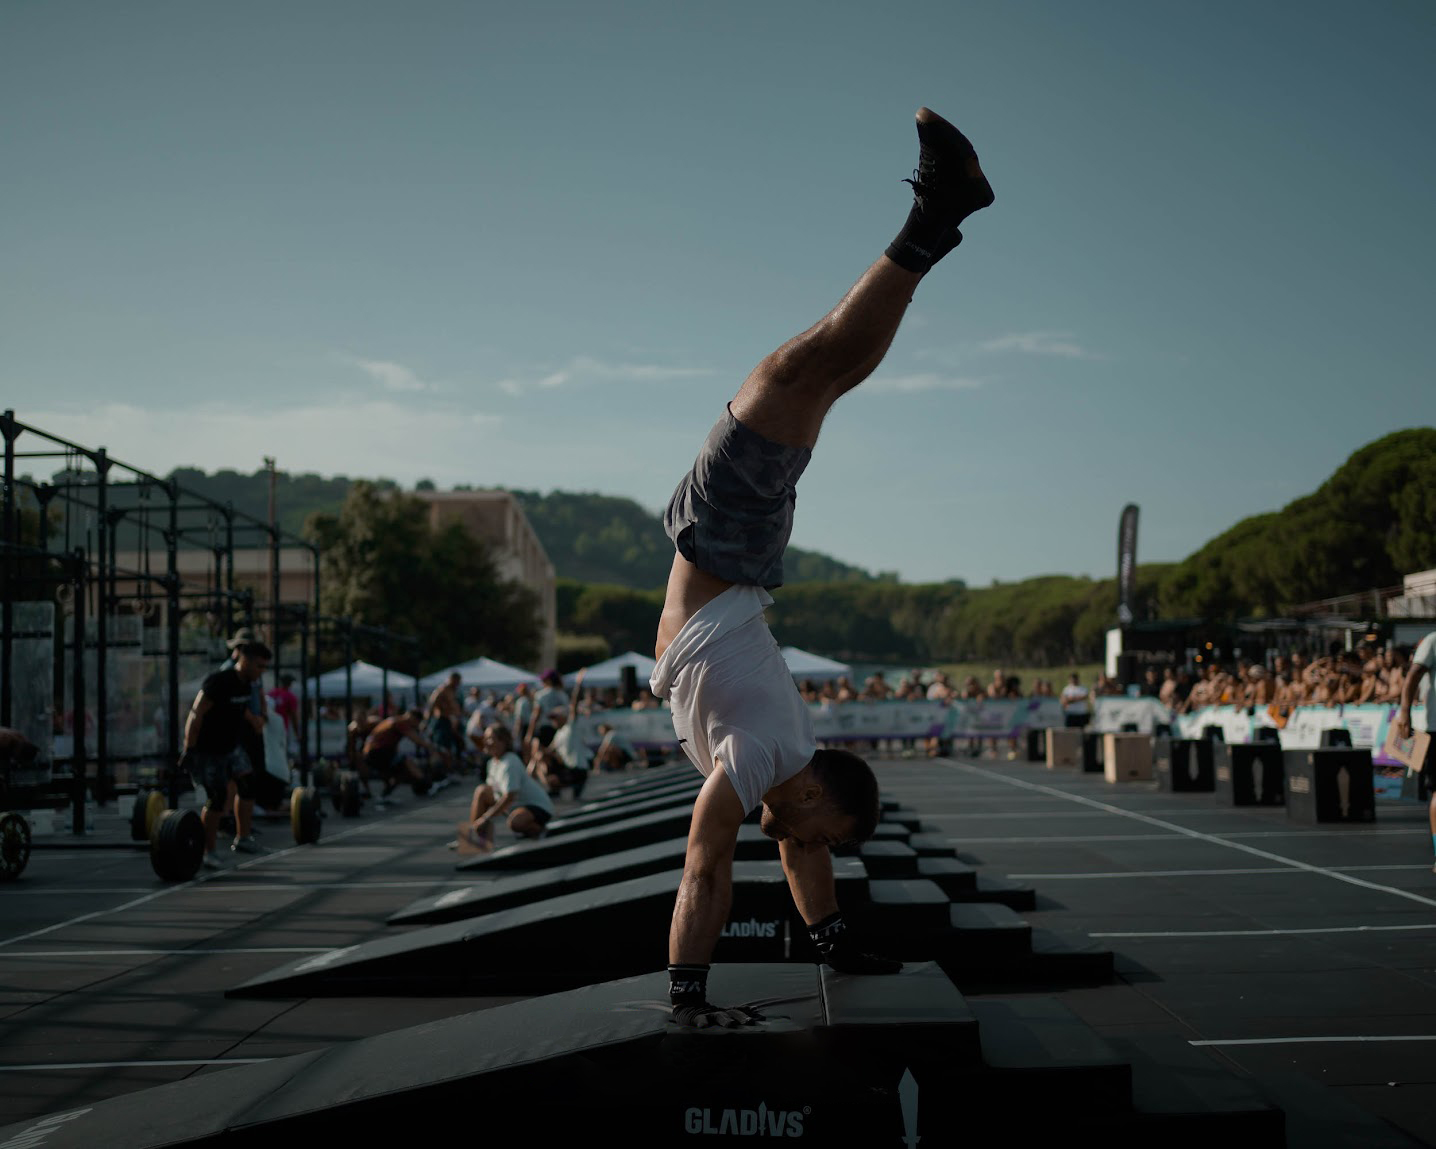 Athlete performing a ramp Hand stand walk during UBL | The Italian Championship, the major Crossfit throwdown in Italy